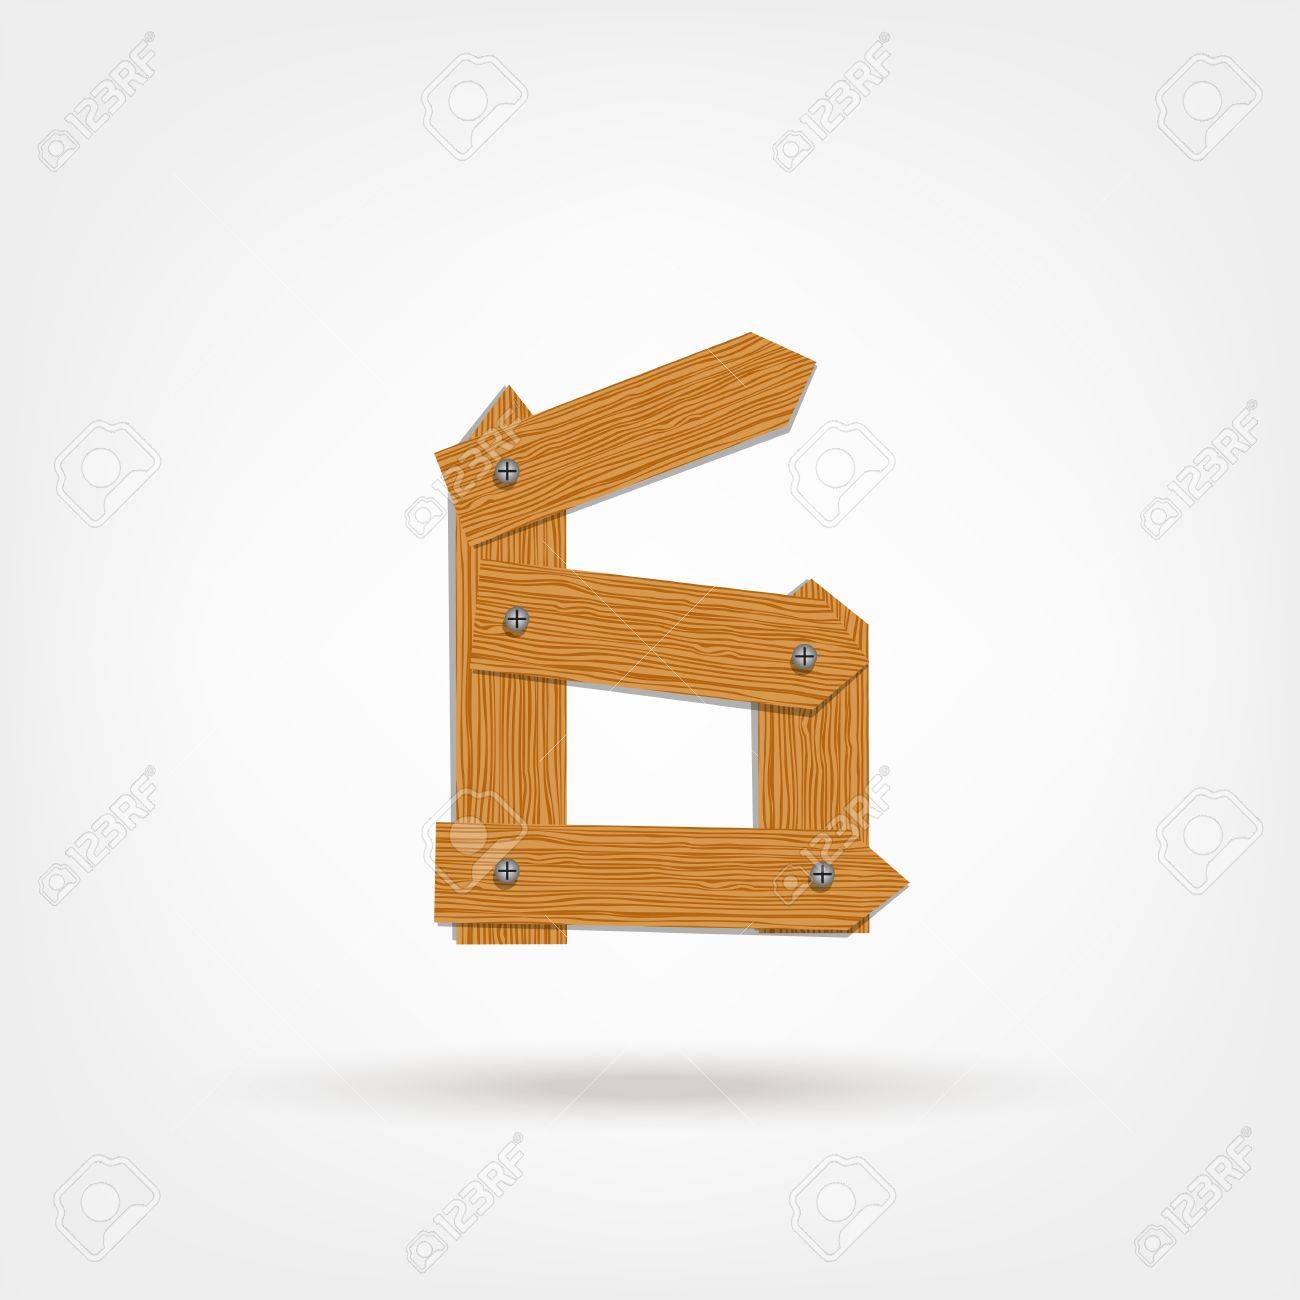 21319963-Number-six-made-from-wooden-boards-for-your-design-Stock-Vector.jpg